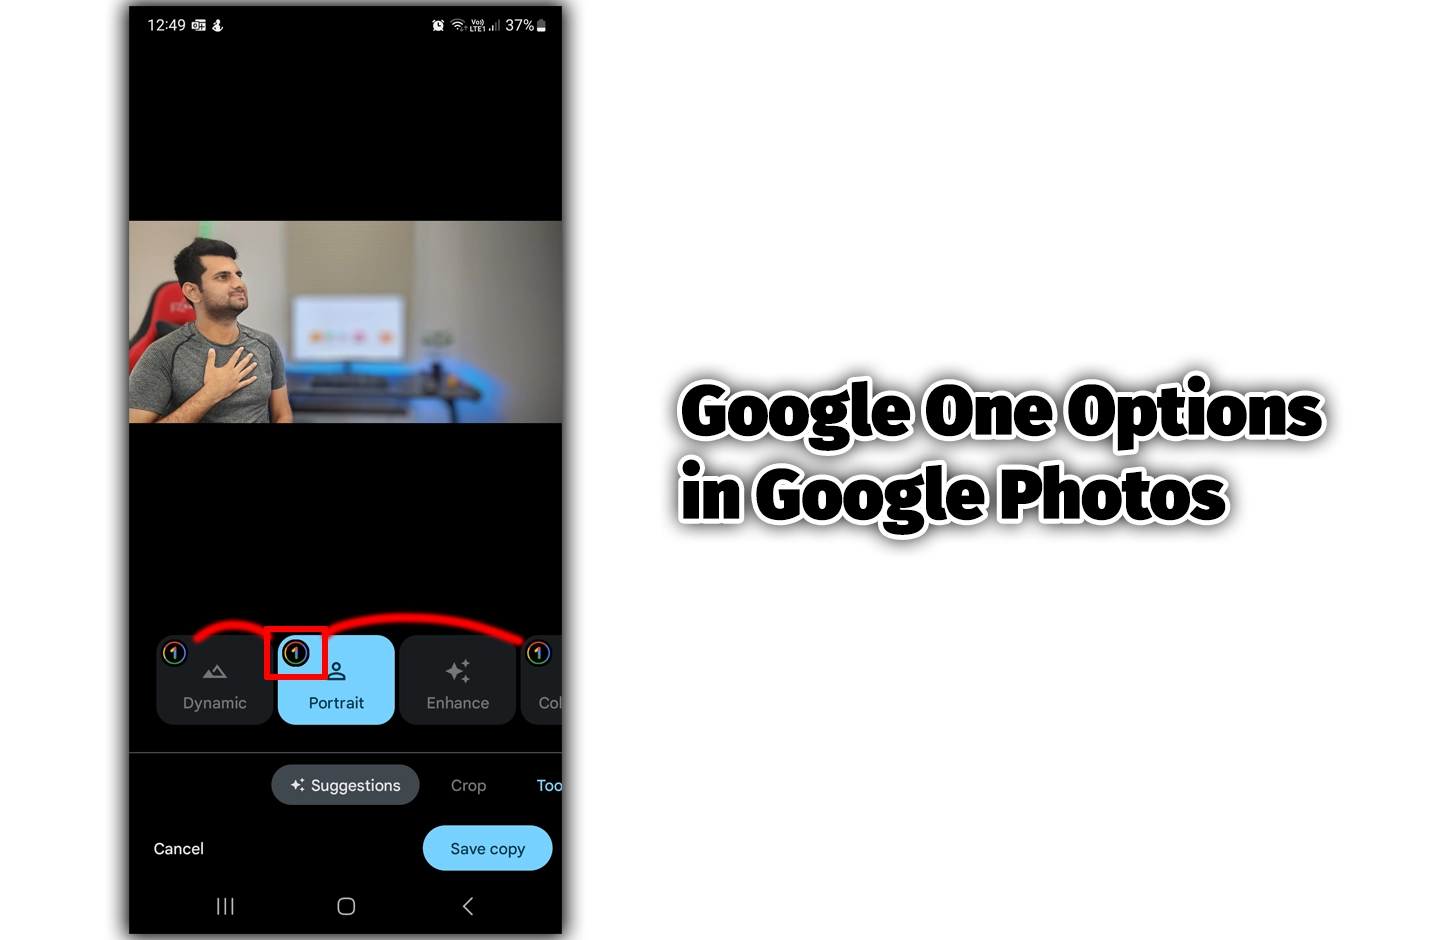 Google One Options in Google Photos